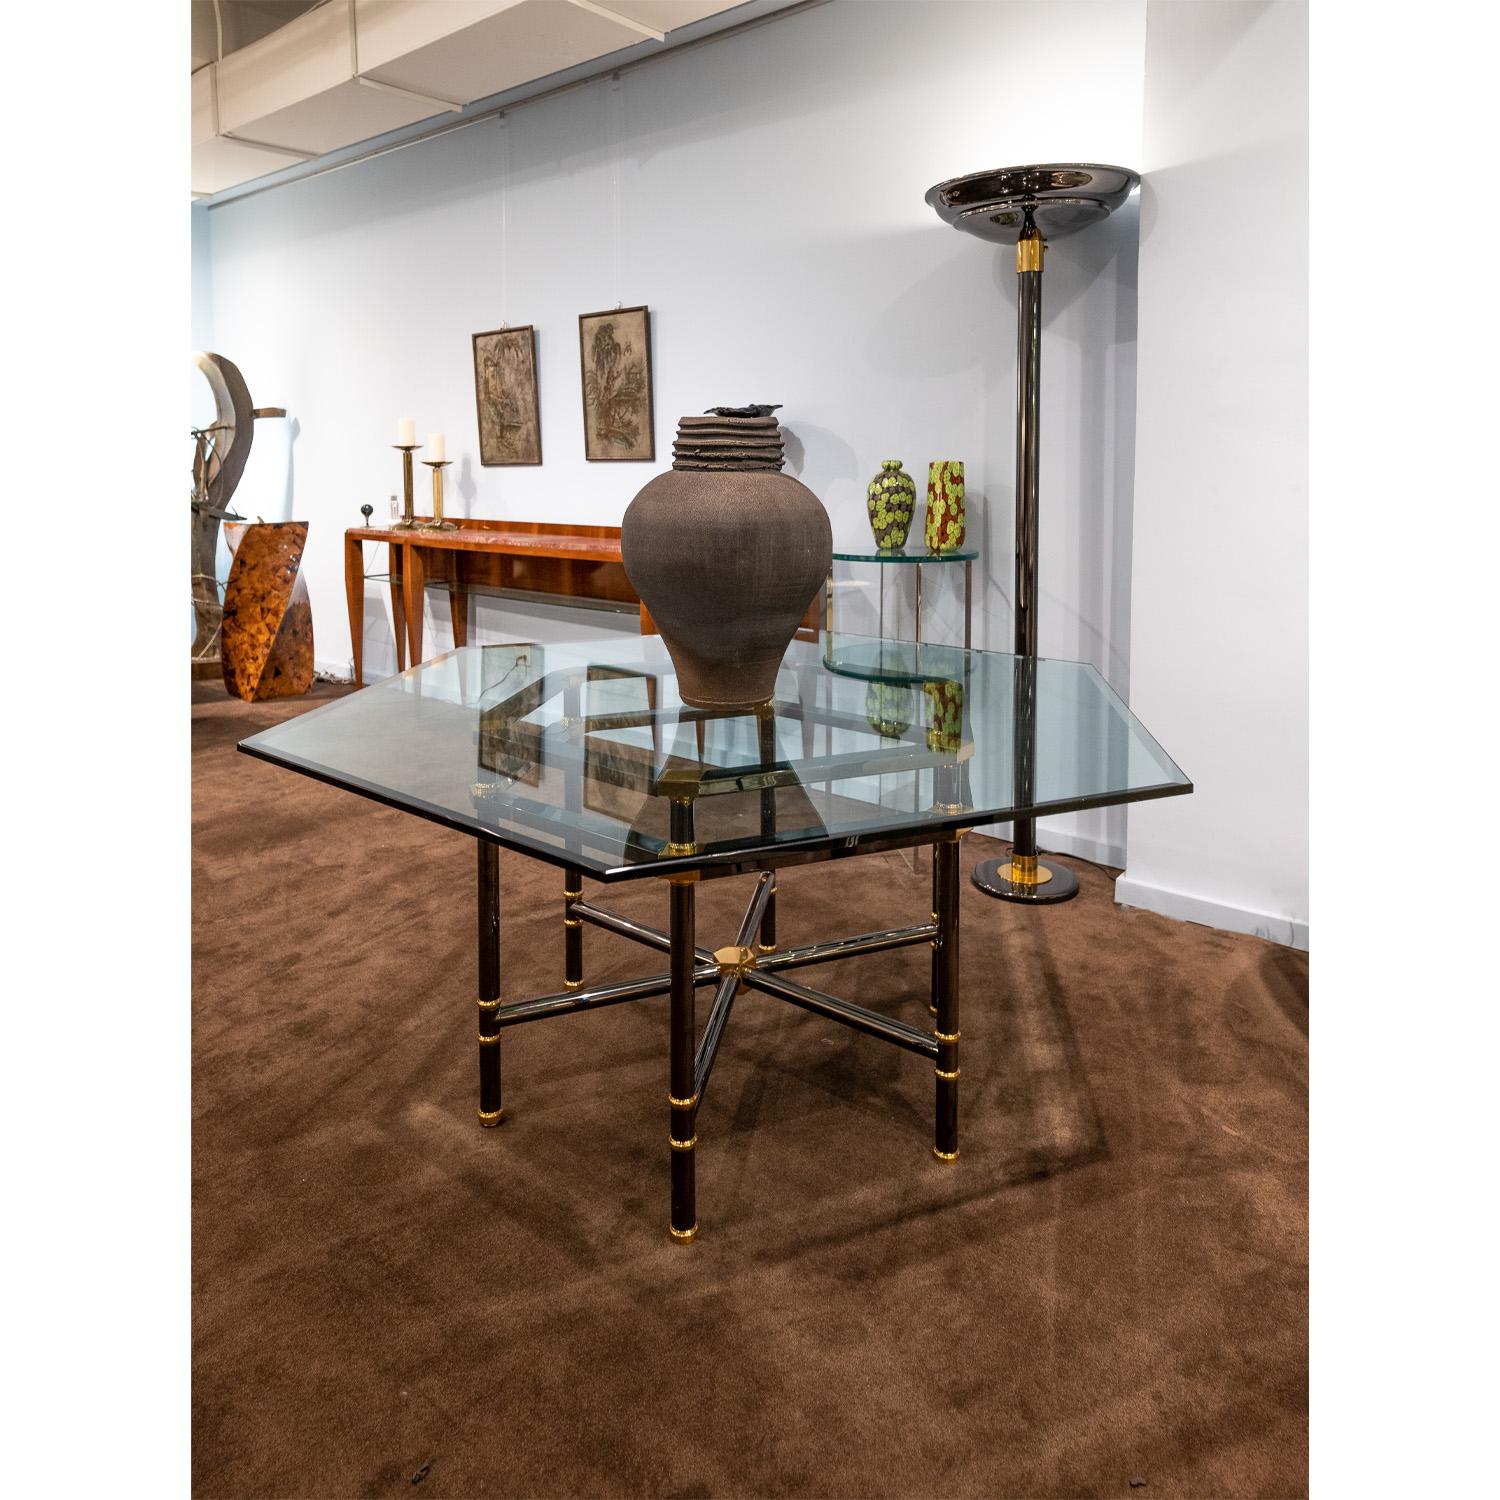 Late 20th Century Karl Springer Jansen Style Dining Table in Polished Gunmetal and Brass 1980s For Sale